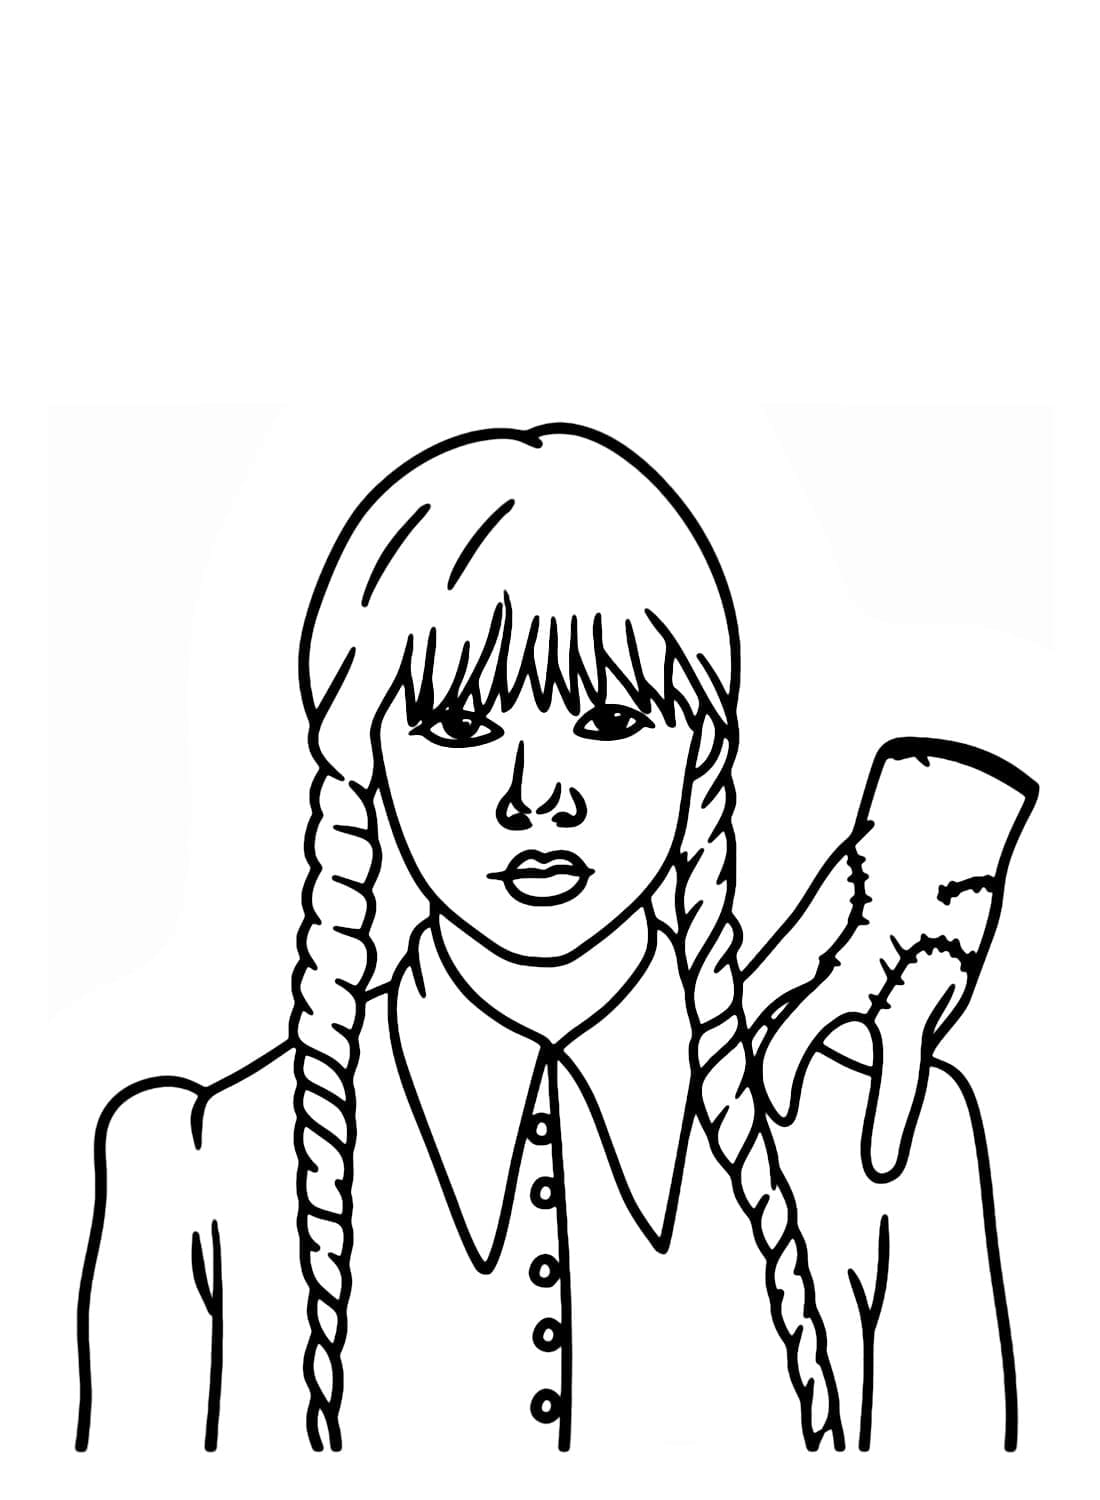 Wednesday addams and thing hand coloring page